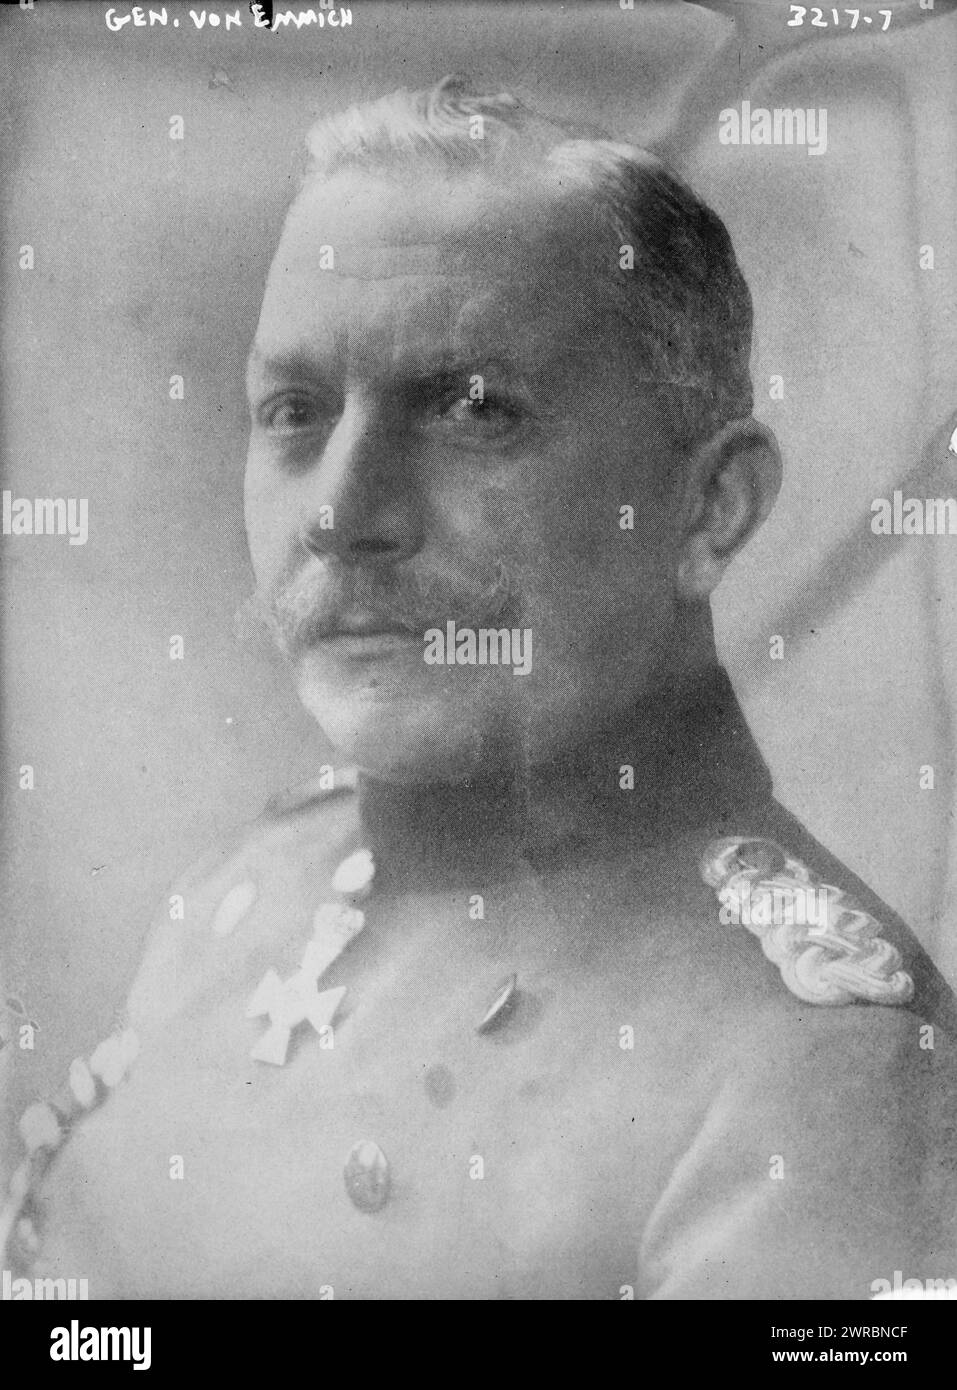 Gen. von Emmich, Photograph shows Prussian general Albert Theodor Otto Emmich (1848-1915) who served in World War I., between ca. 1910 and ca. 1915, Glass negatives, 1 negative: glass Stock Photo